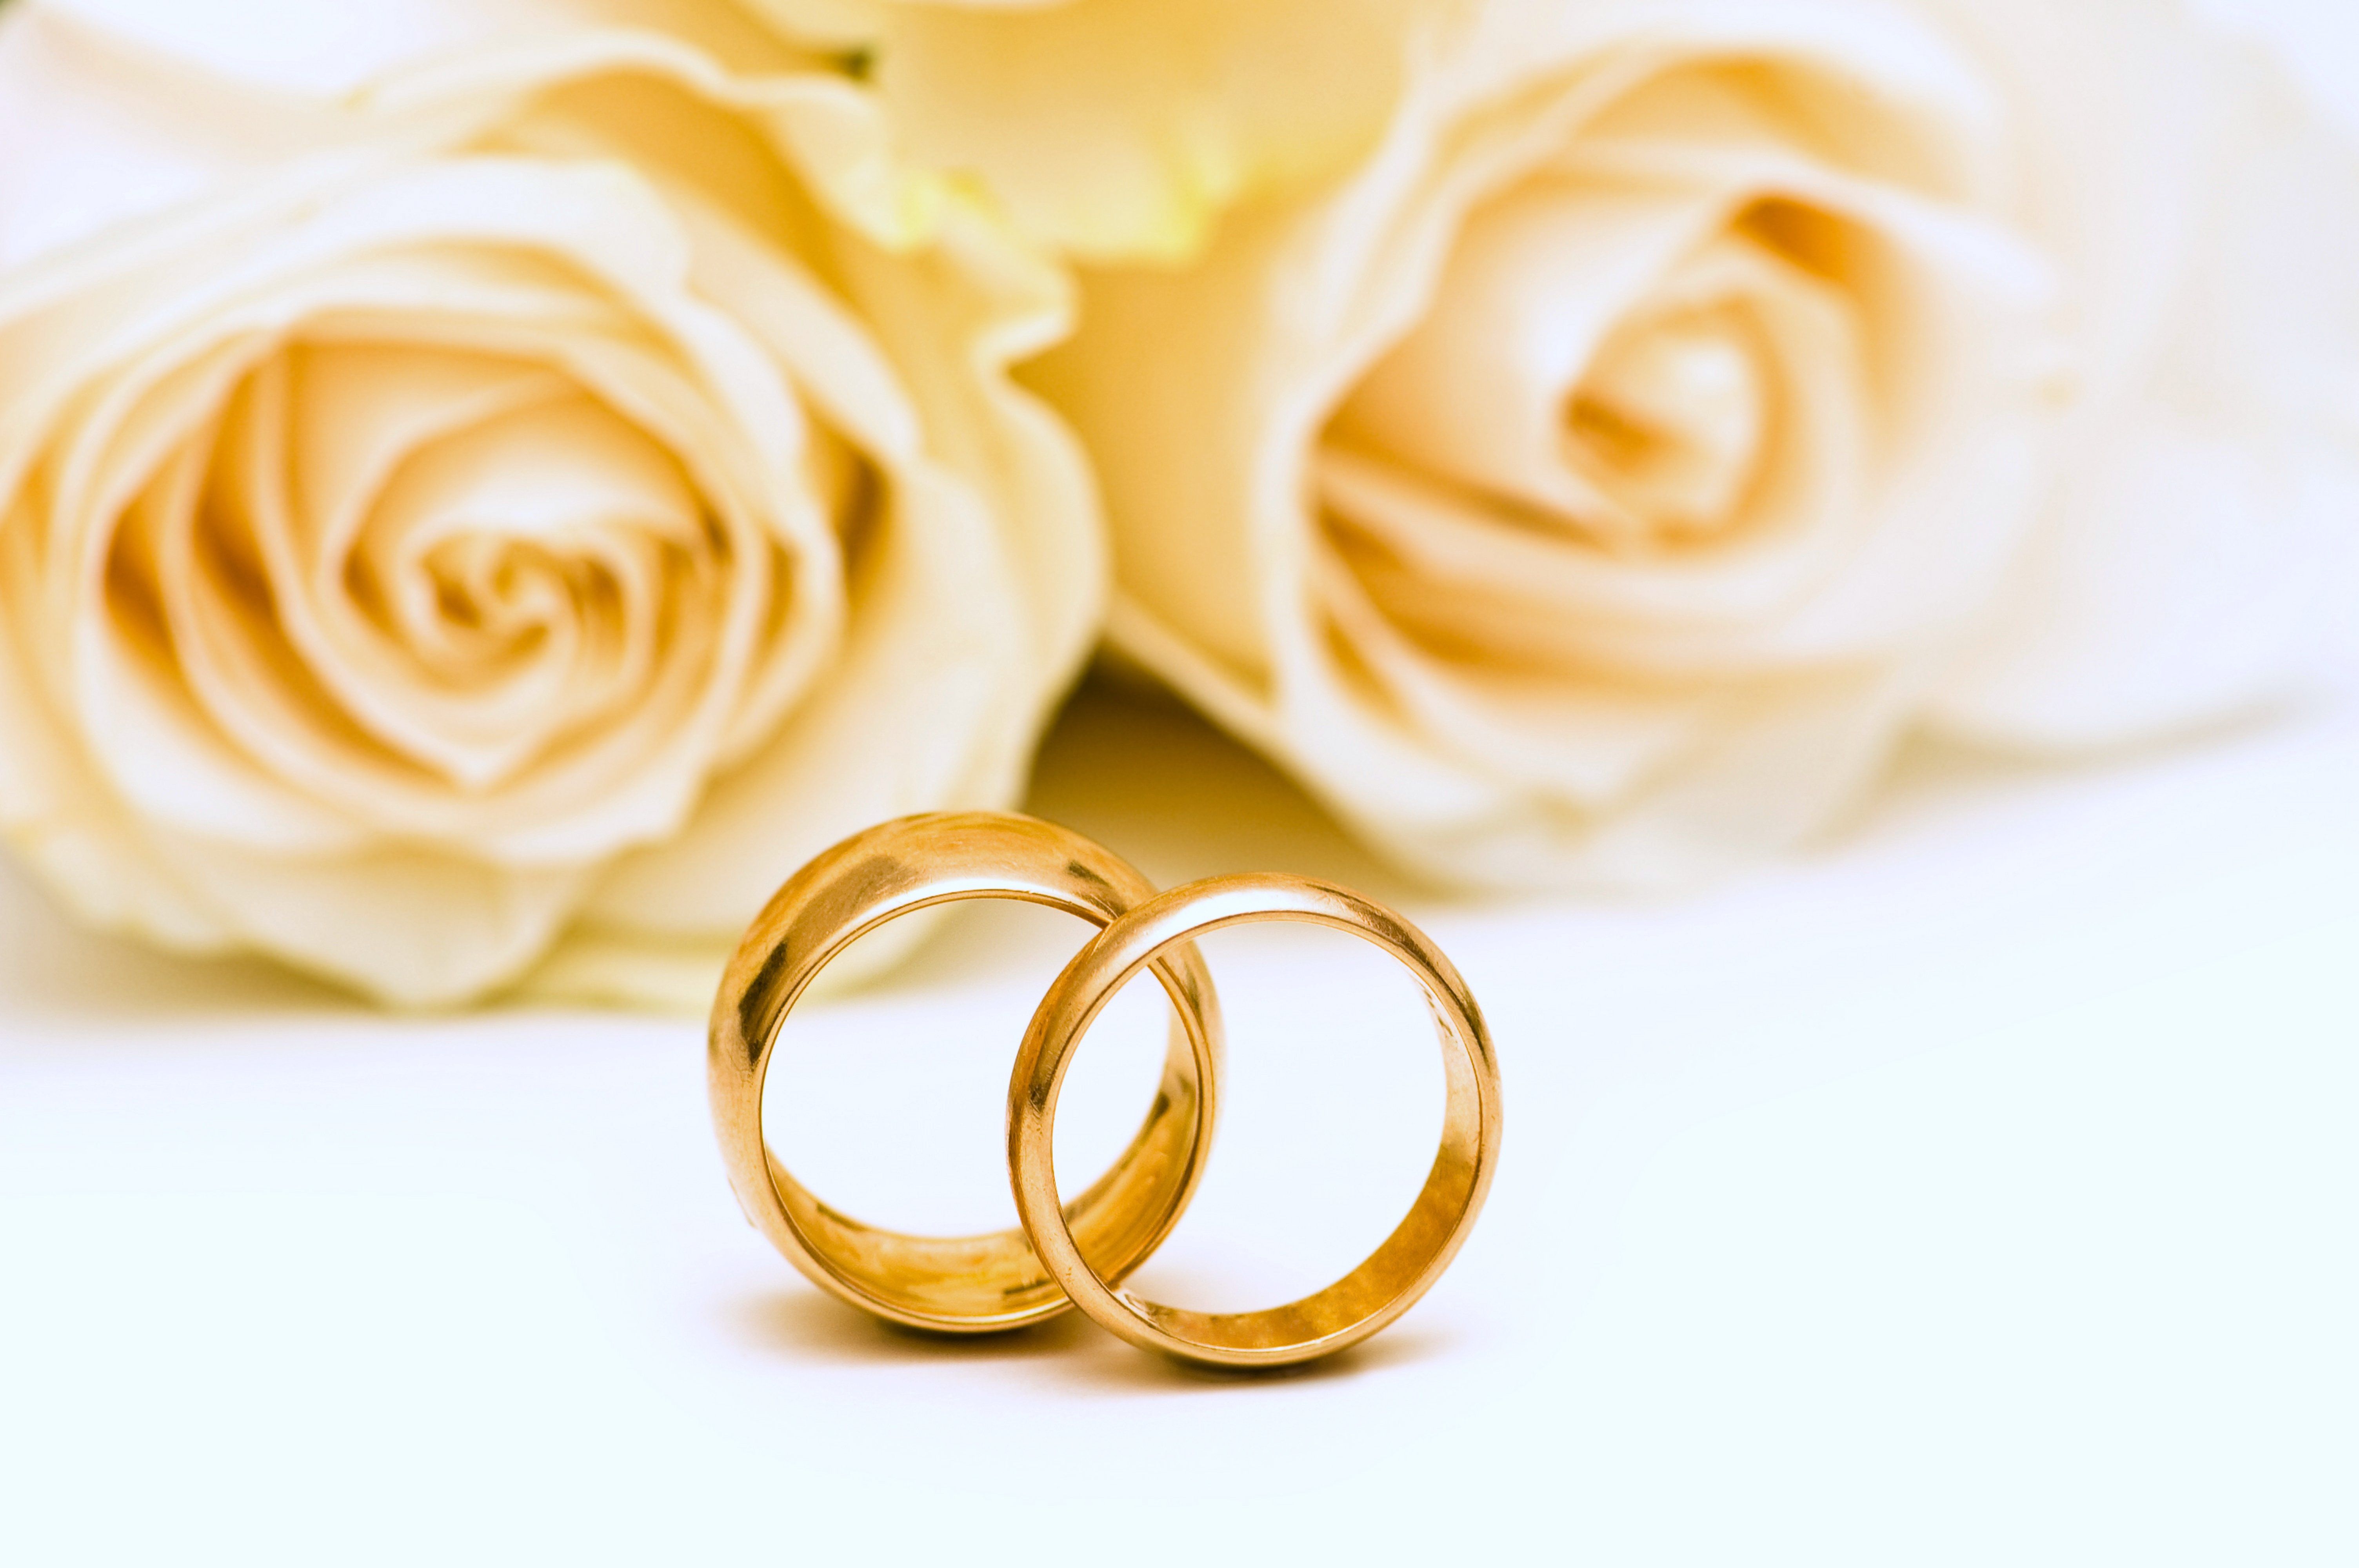 Wedding rings roses flowers gold lovers yellow romance emotions